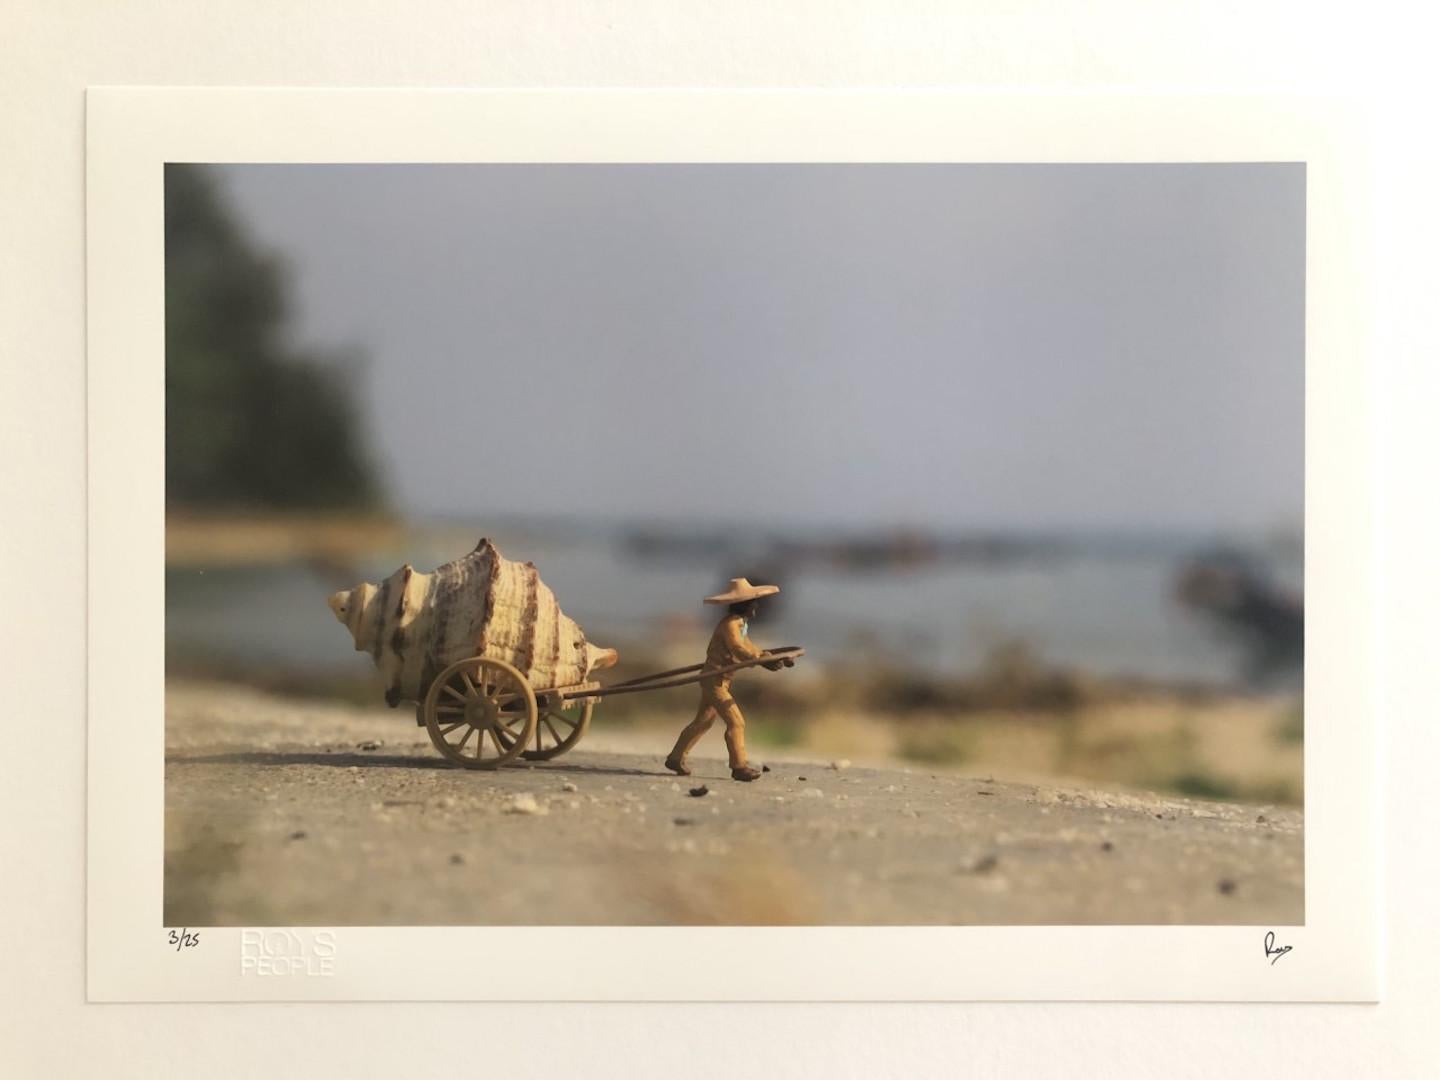 Roy’s People
He Sells Sea Shells
Photographic Print
Fuji Pearl Archival print
Image Size: 30 cm x 42 cm x 0.2 cm
Sold unframed
Free Shipping
(Please note that in situ images are purely an indication of how a piece may look).

Photographic print